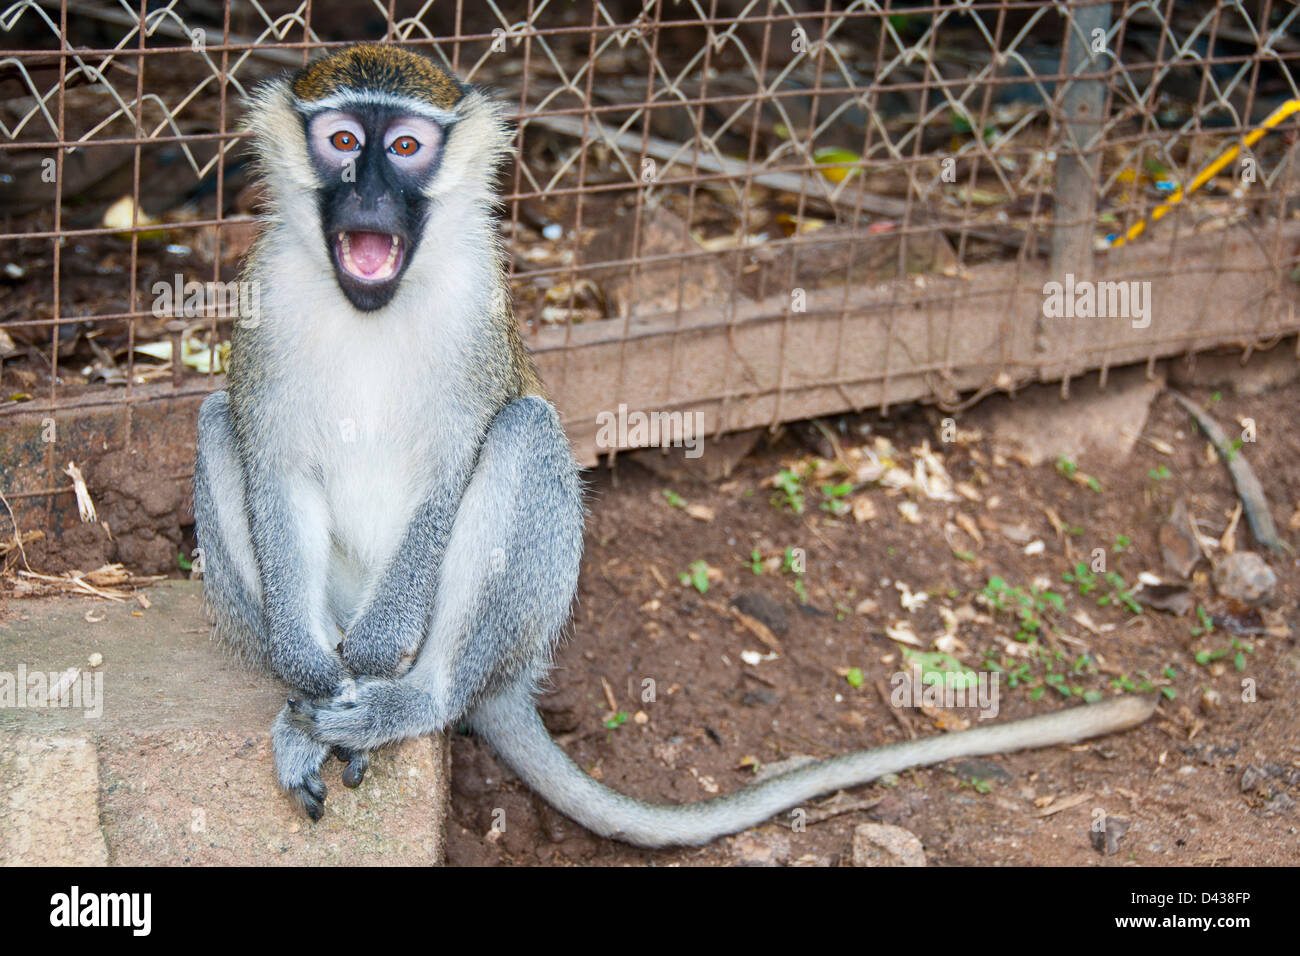 Black-faced monkey, laughing Stock Photo